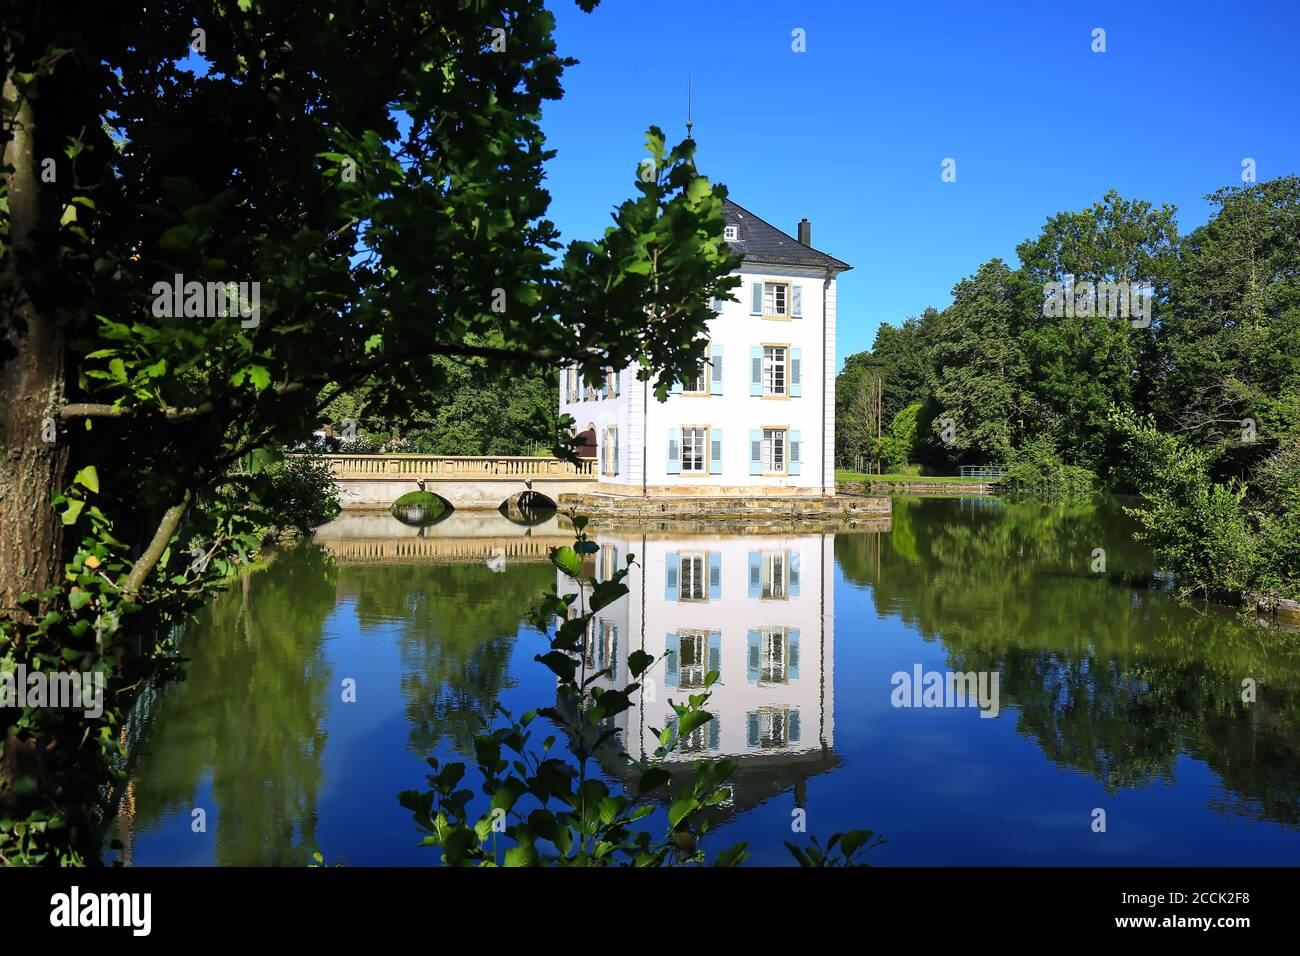 Trappensee is a sight of the city of Heilbronn Stock Photo